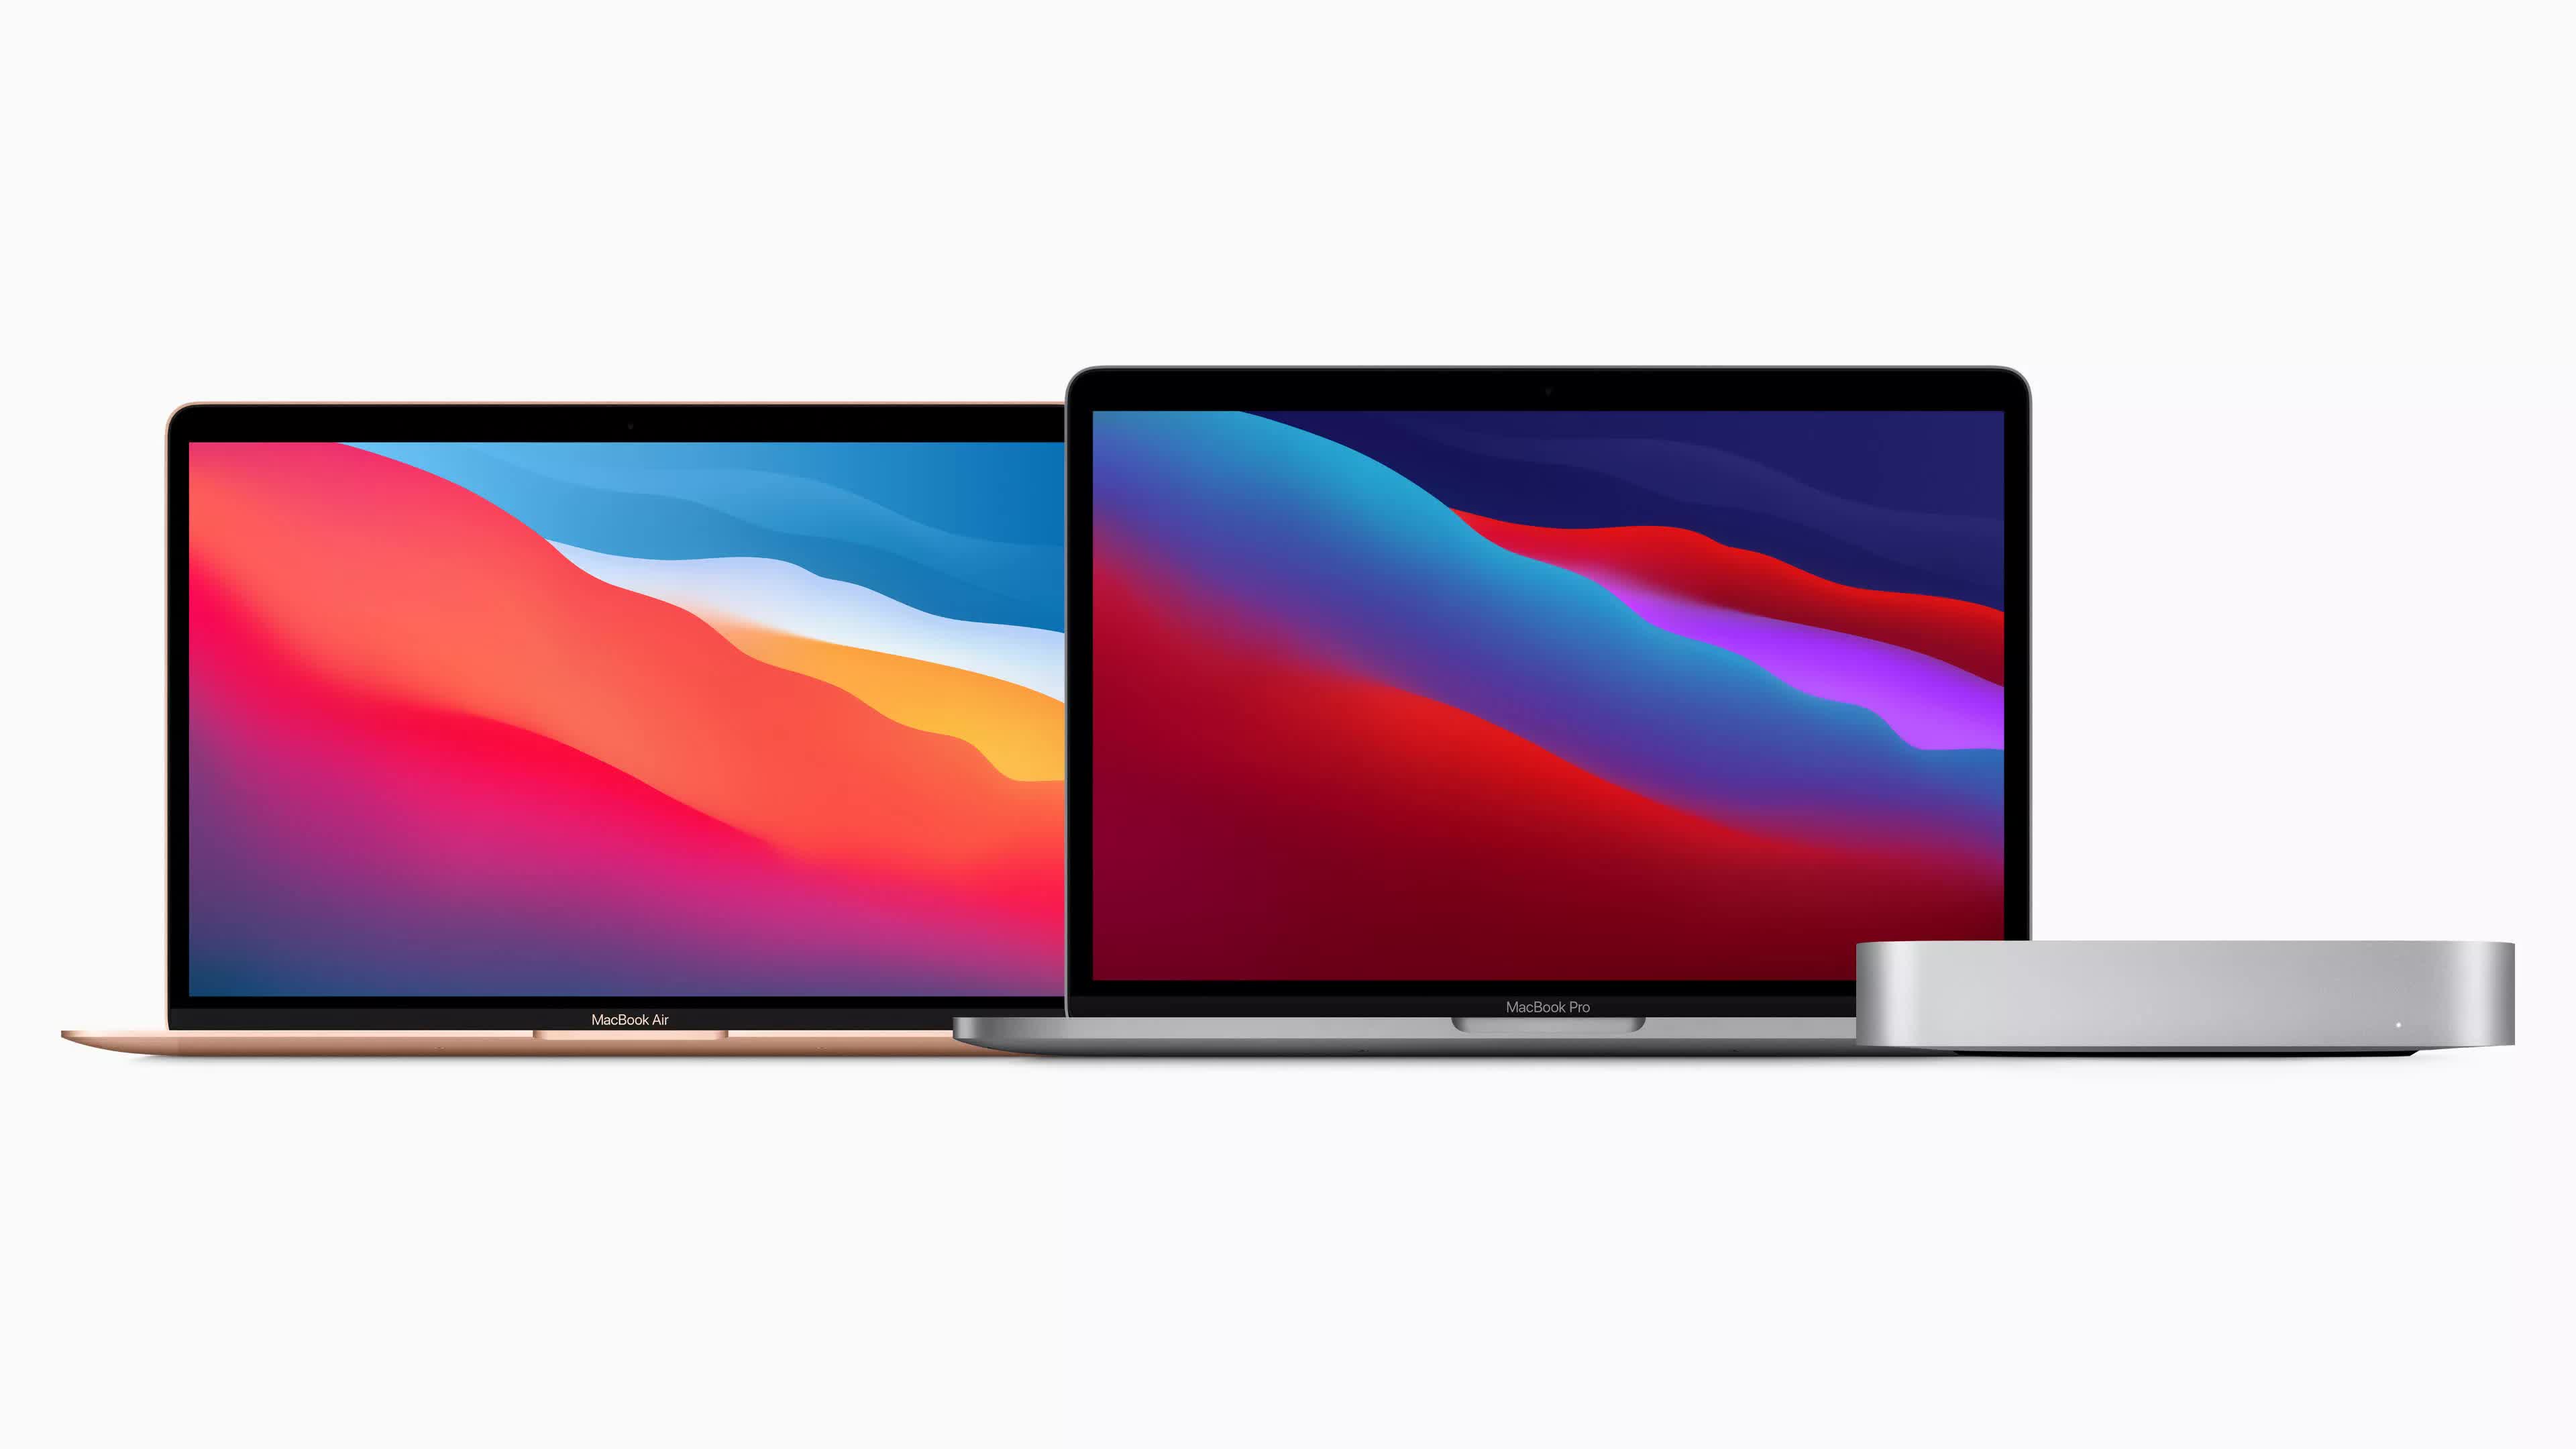 New macOS malware discovered, but threat remains unknown